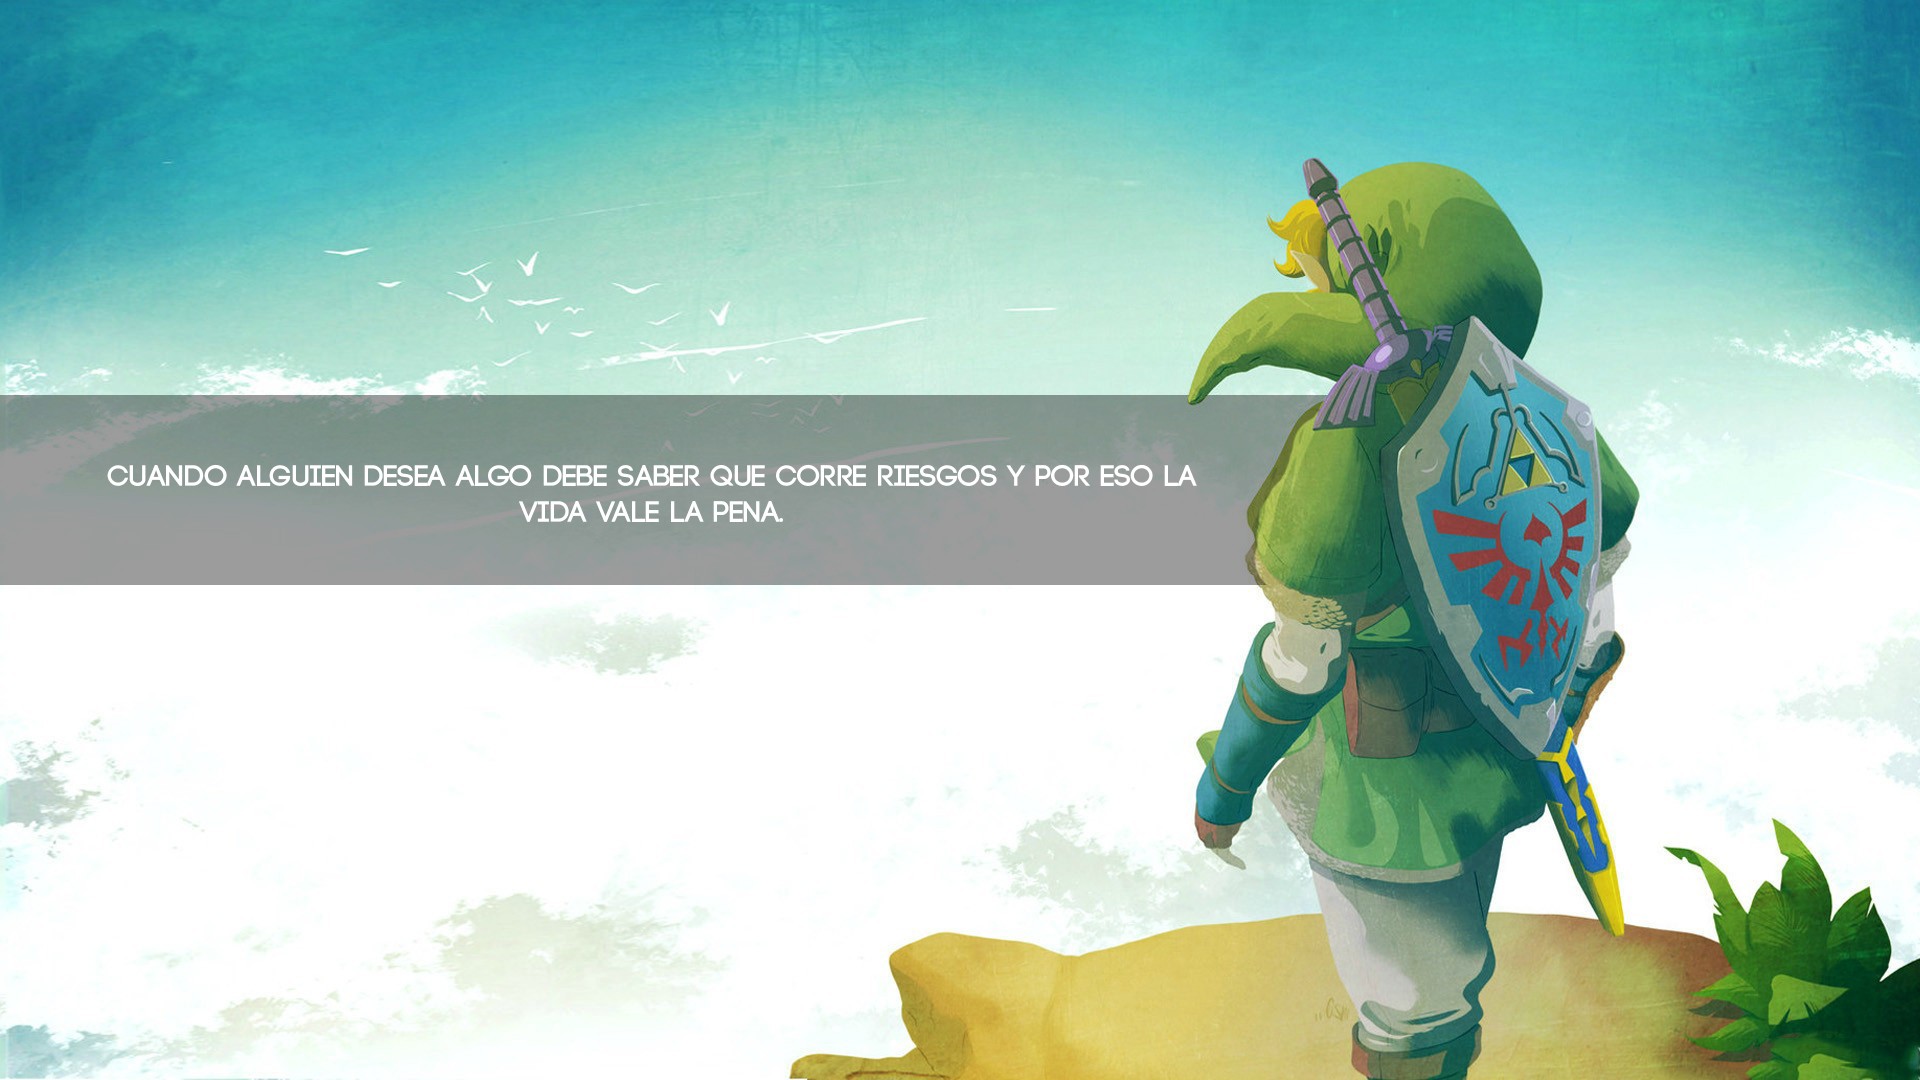 Anime 1920x1080 The Legend of Zelda Link Master Sword Hylian Shield video games video game characters Video Game Heroes